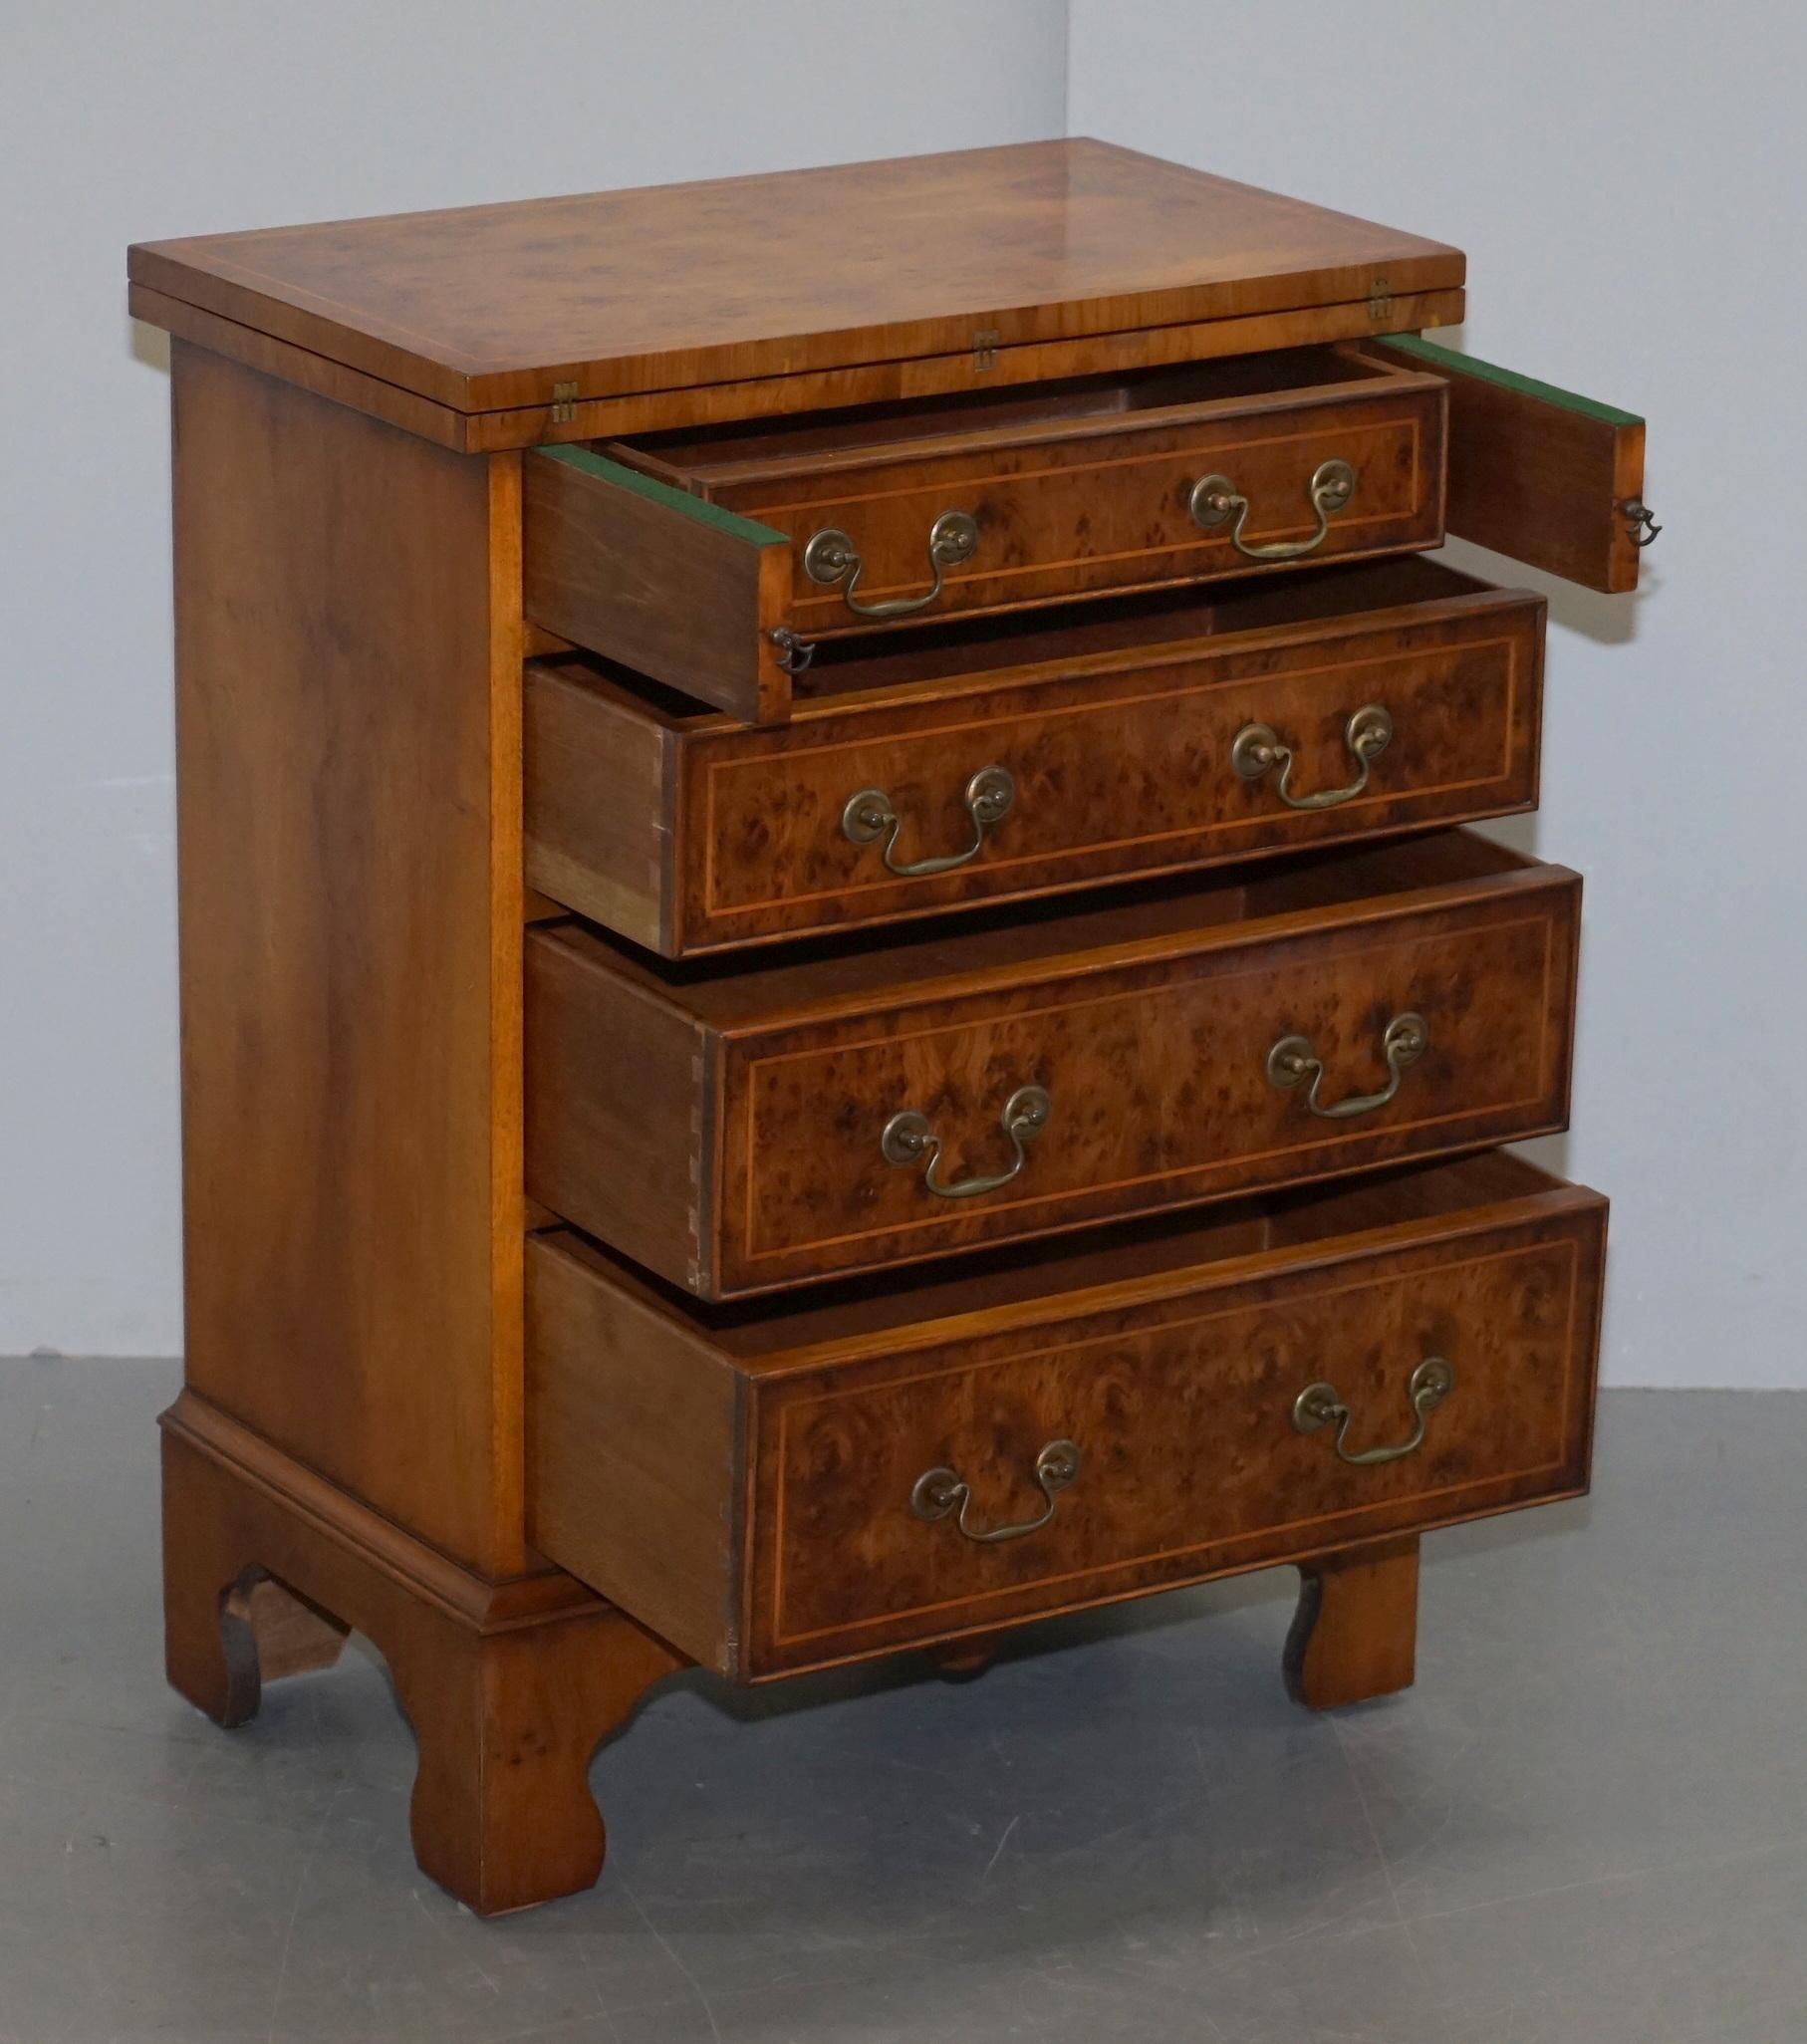 Sublime Burr Walnut Side Table Sized Chest of Drawers with Butlers Serving Tray 12